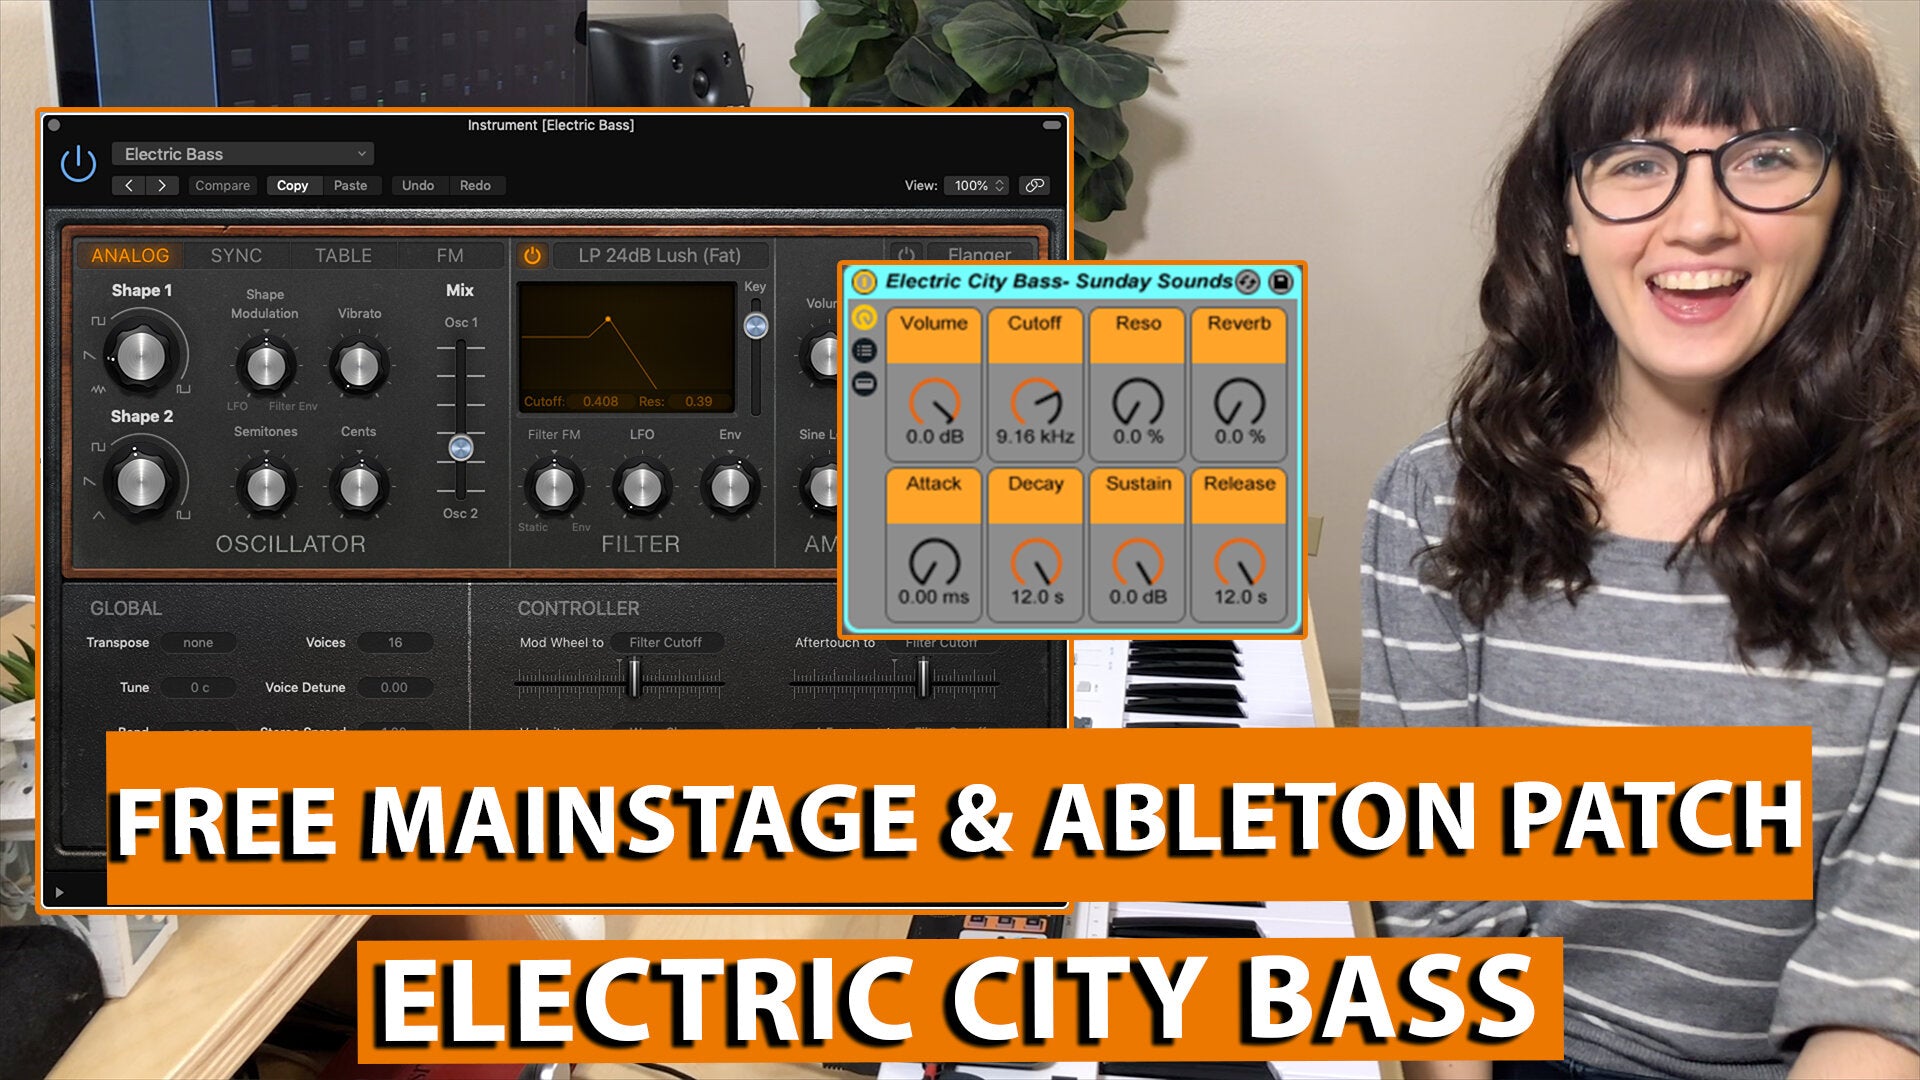 Free MainStage & Ableton Worship Patch! - Electric City Bass